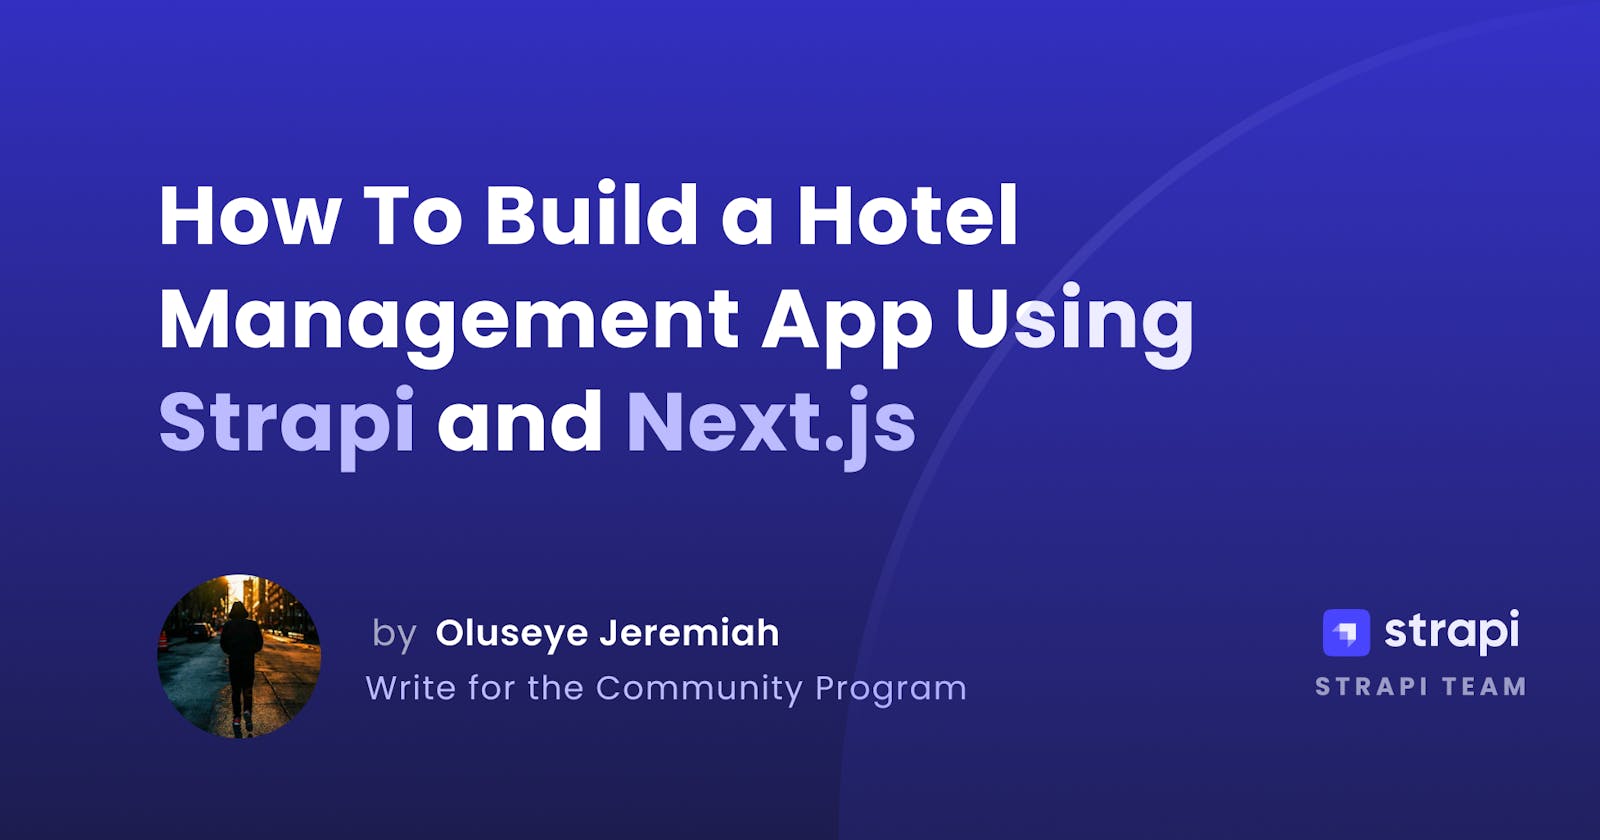 How To Build a Hotel Management App Using Strapi and Next.js